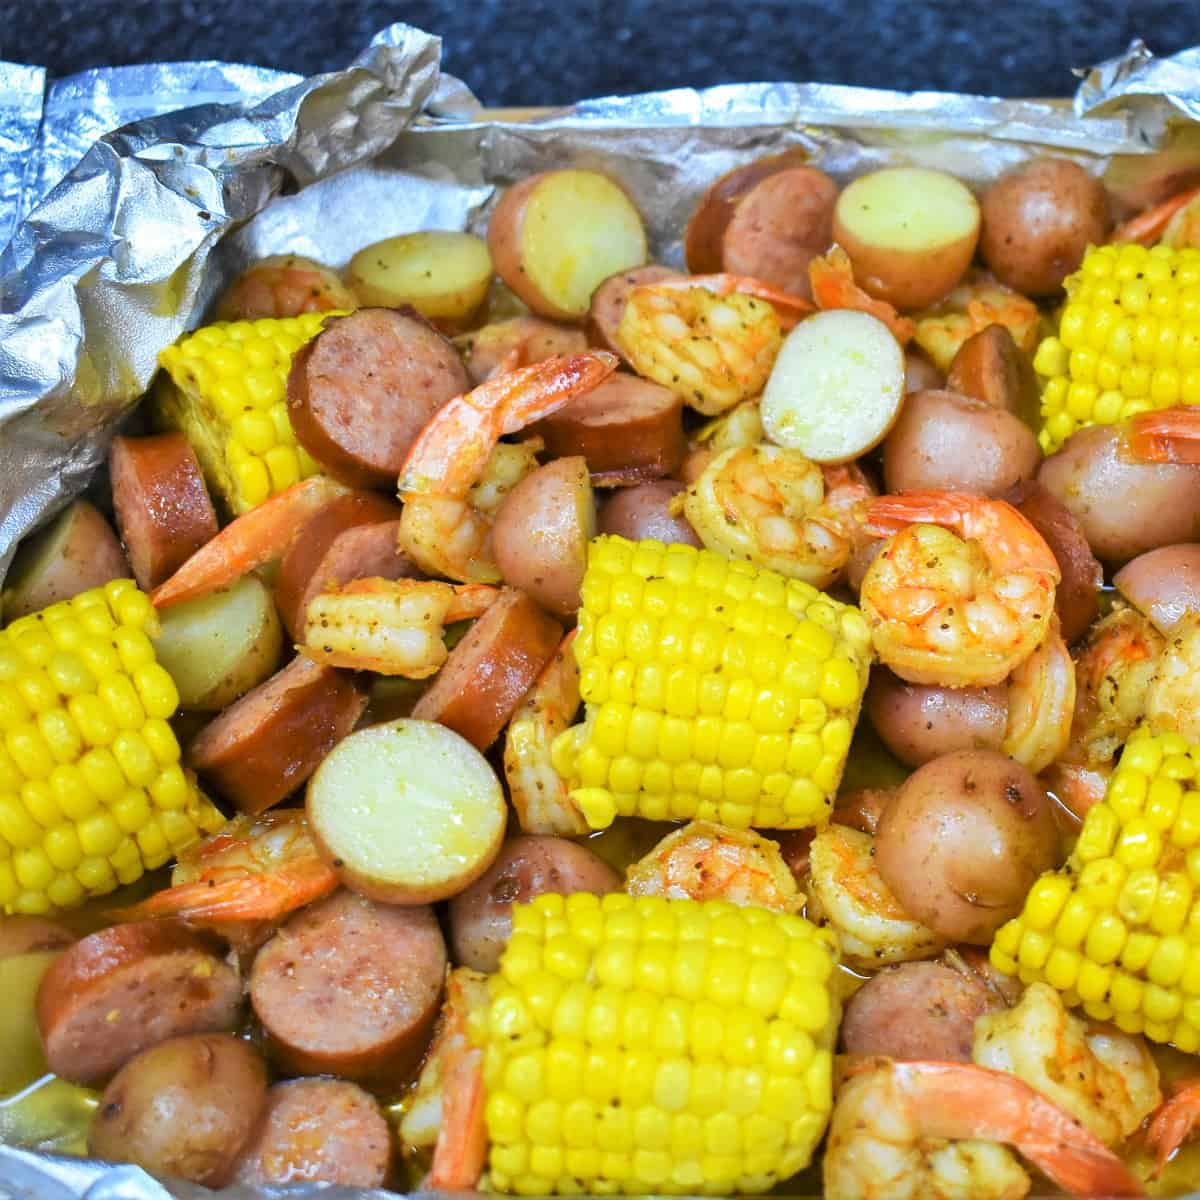 An image of the cooked shrimp dinner in the opened foil packet.